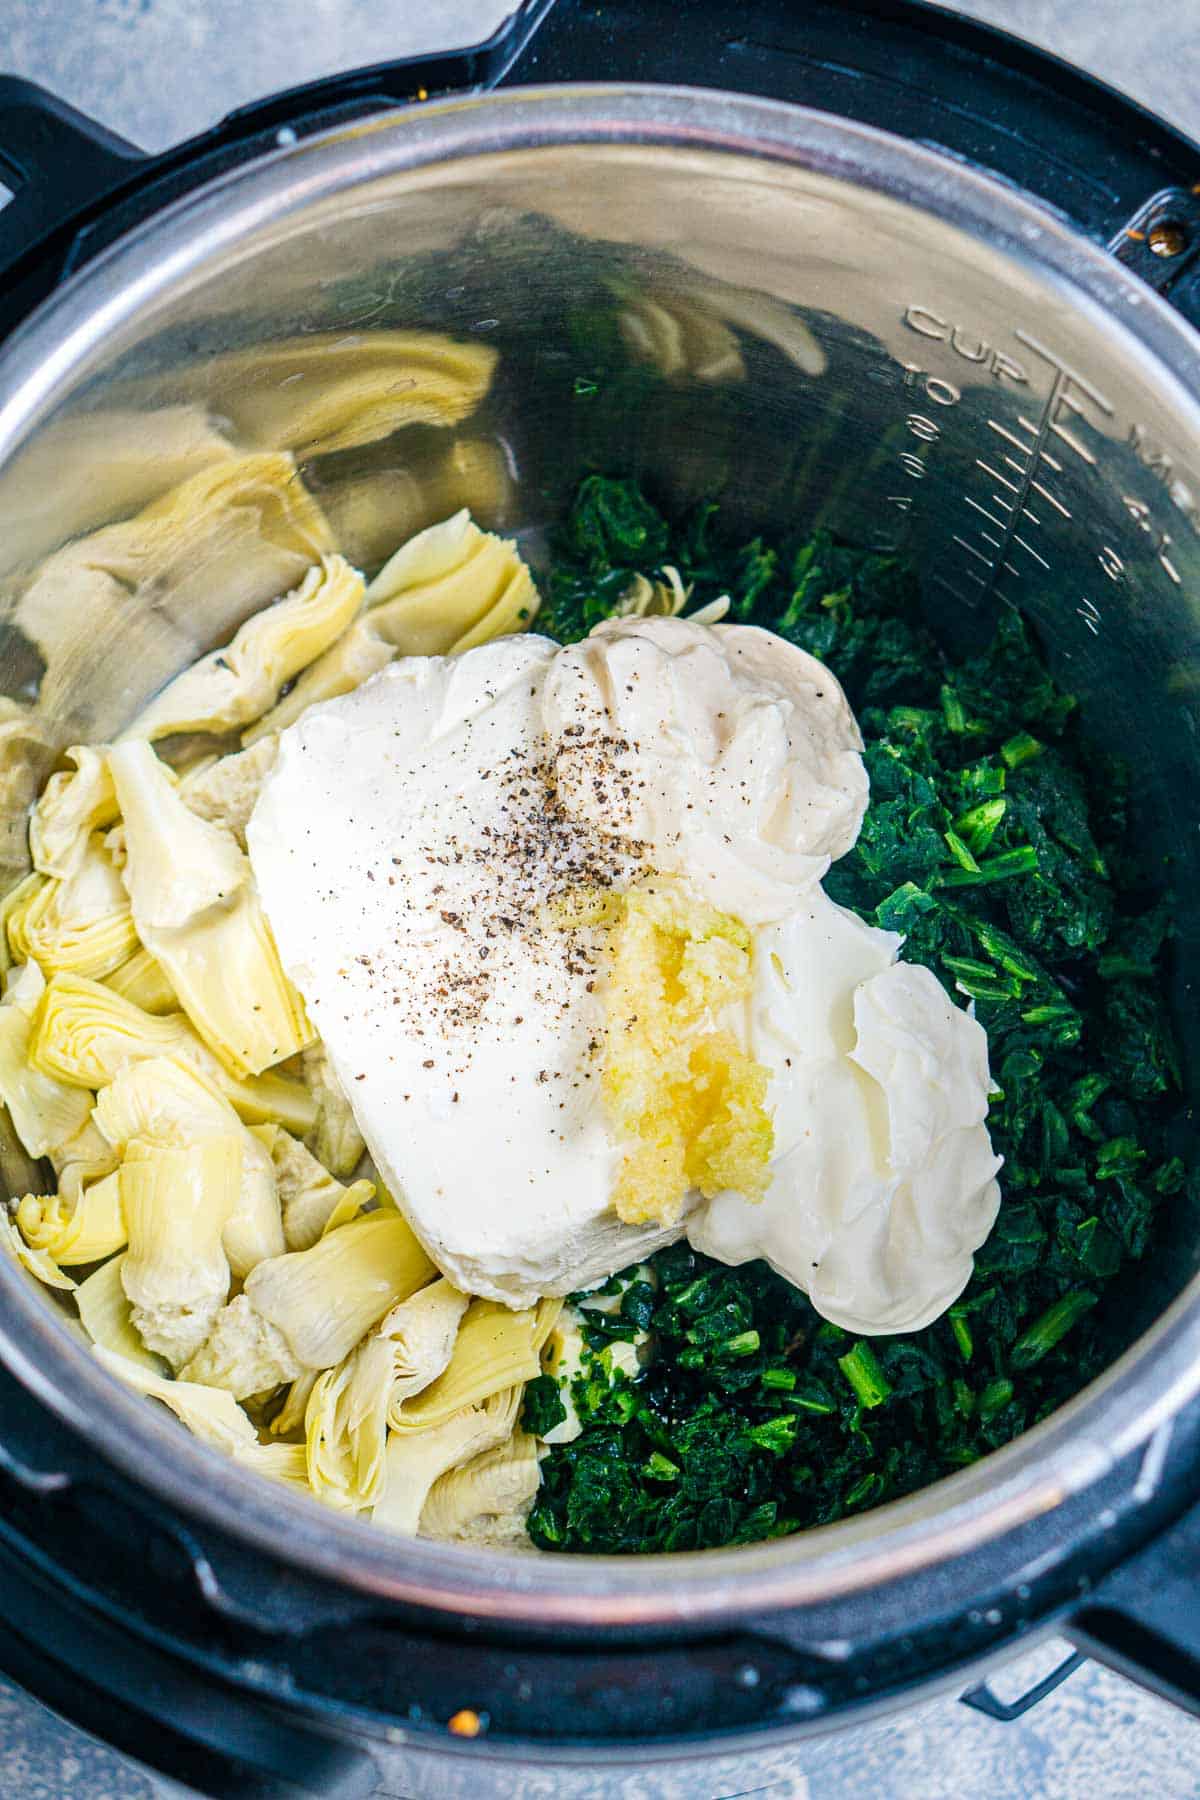 spinach artichoke dip ingredients are layered in the instant pot before pressure cooking